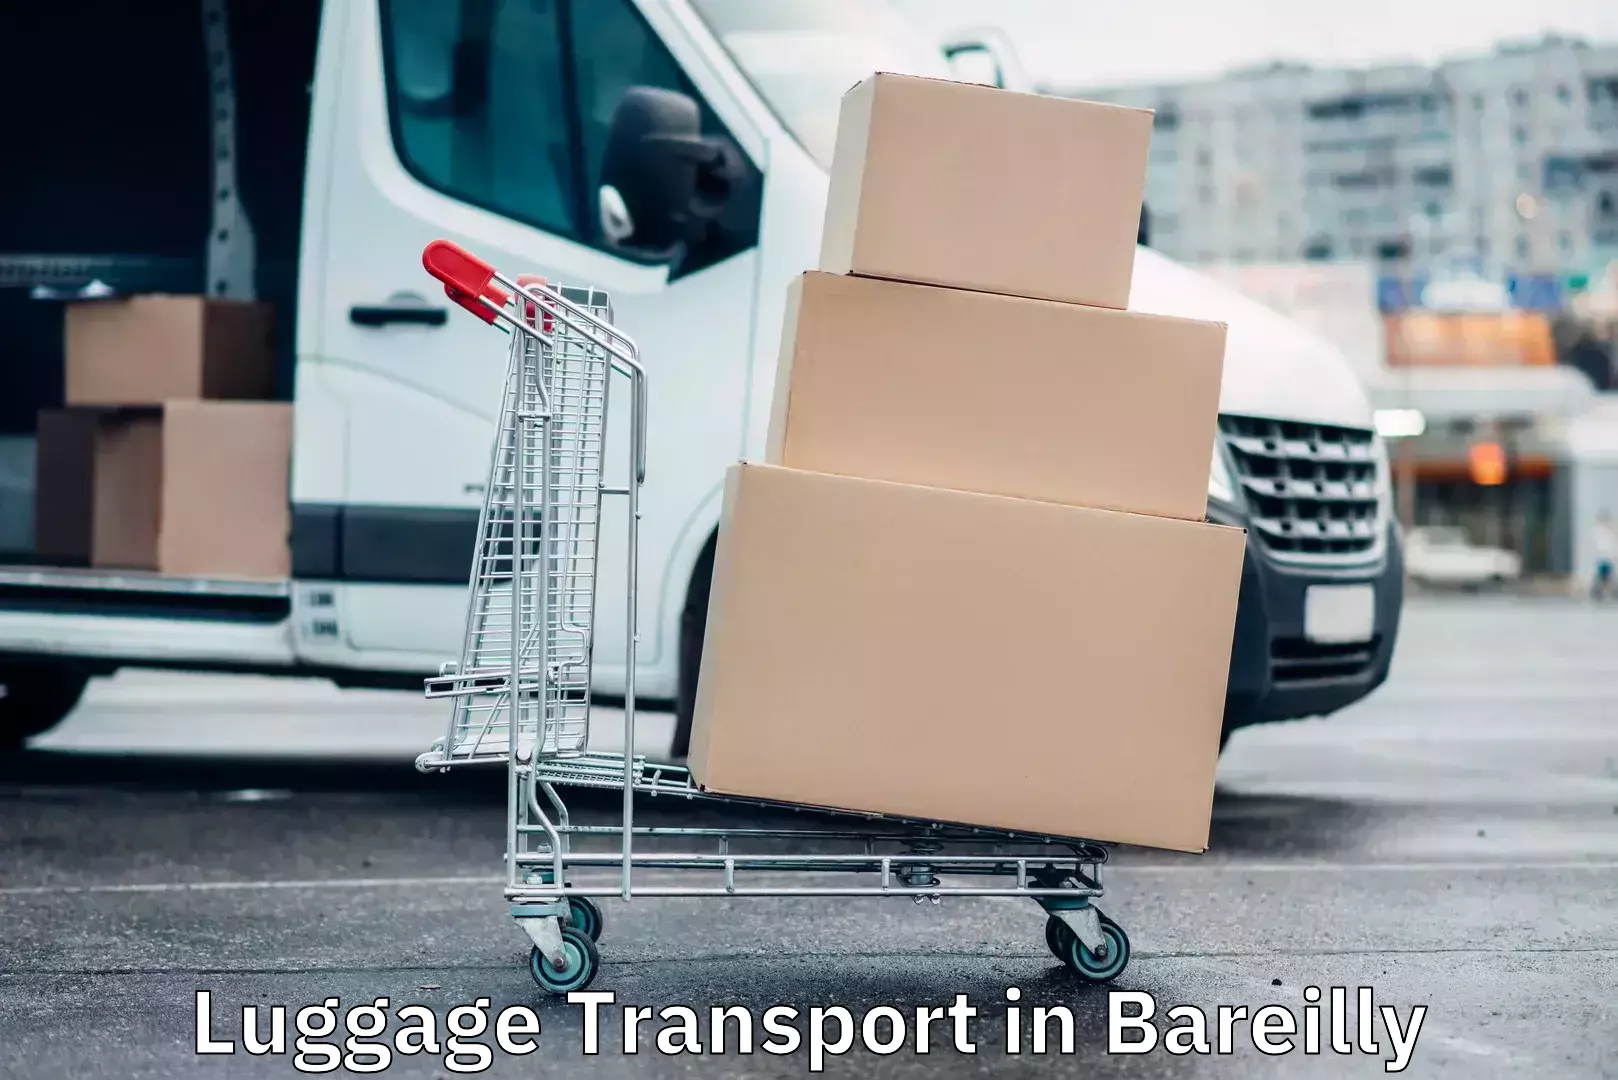 Luggage transport rates in Bareilly